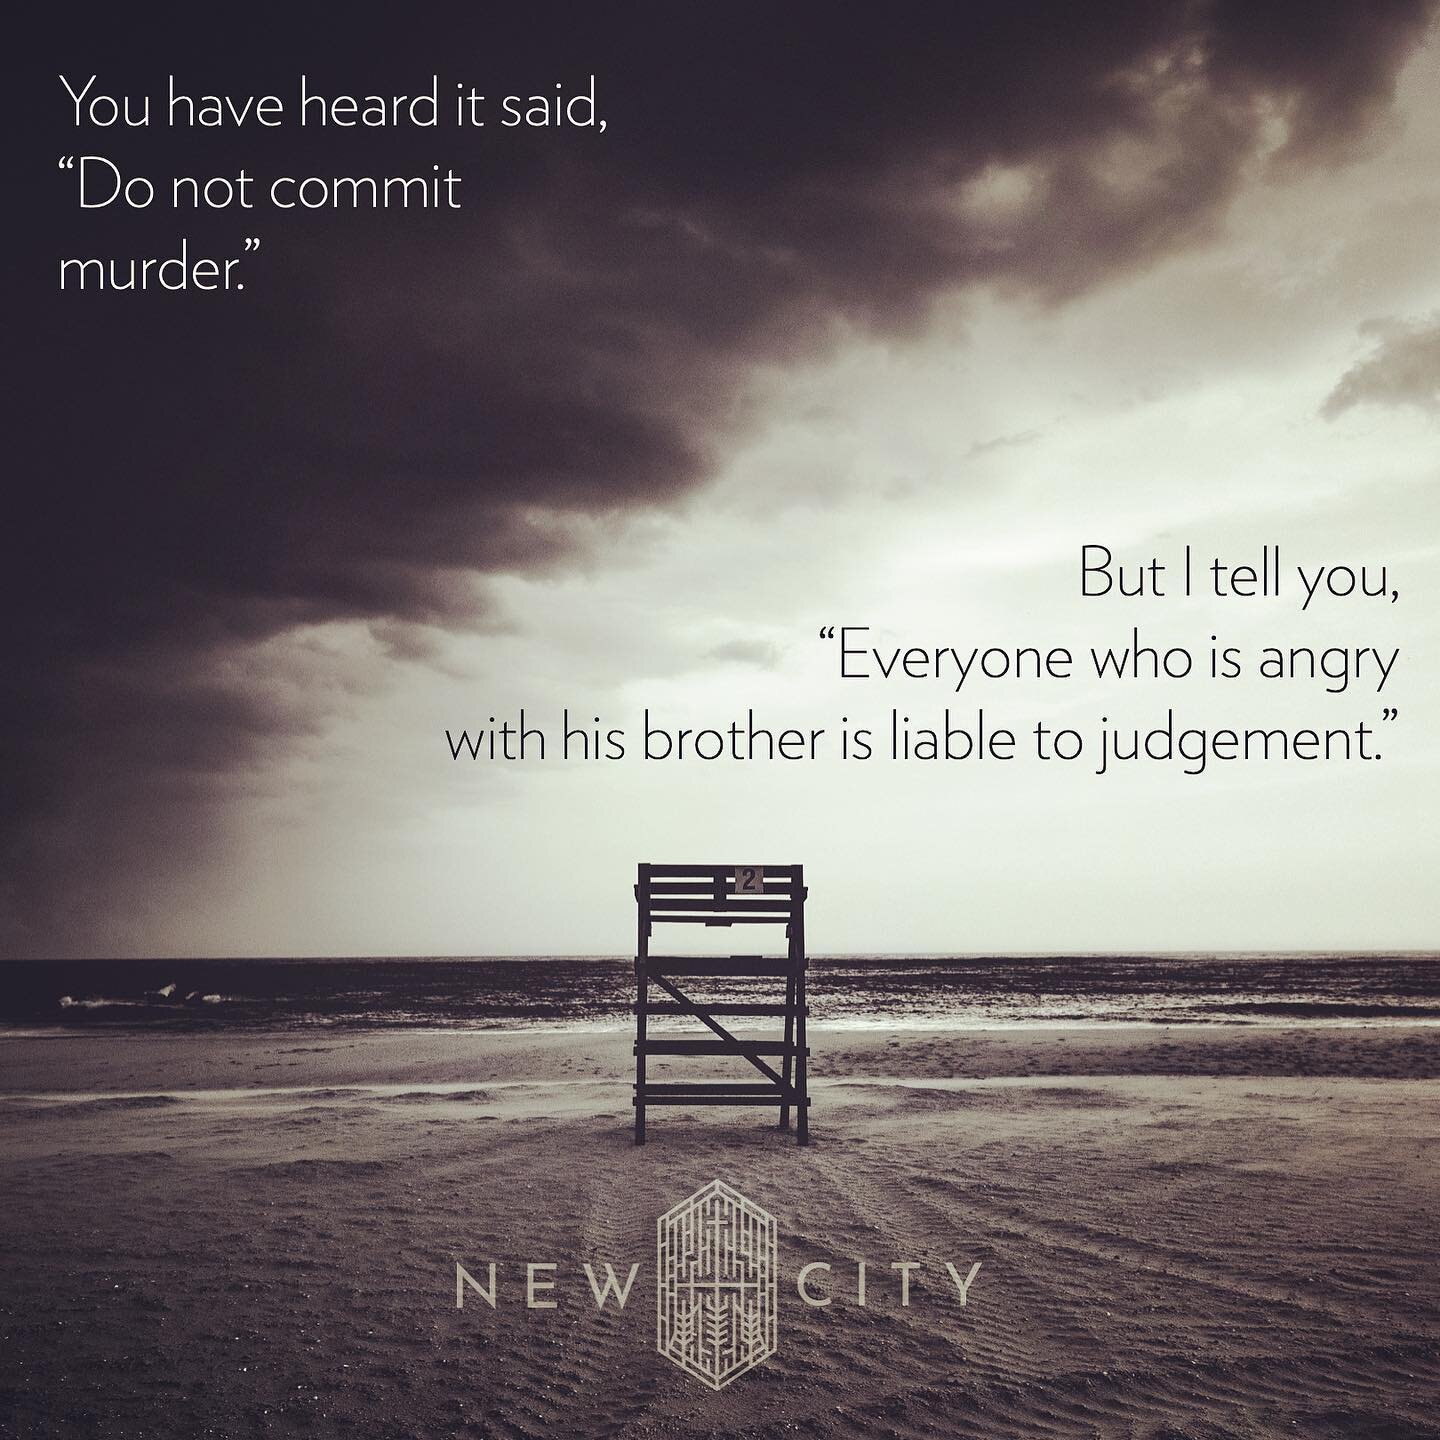 The One who was murdered unjustly offers murderers&hellip;life-takers like you and me forgiveness, healing and re-tasks us as Life-GIVERS! 
Don&rsquo;t have a church? We&rsquo;d love to have you. More at www.newcitypres.org